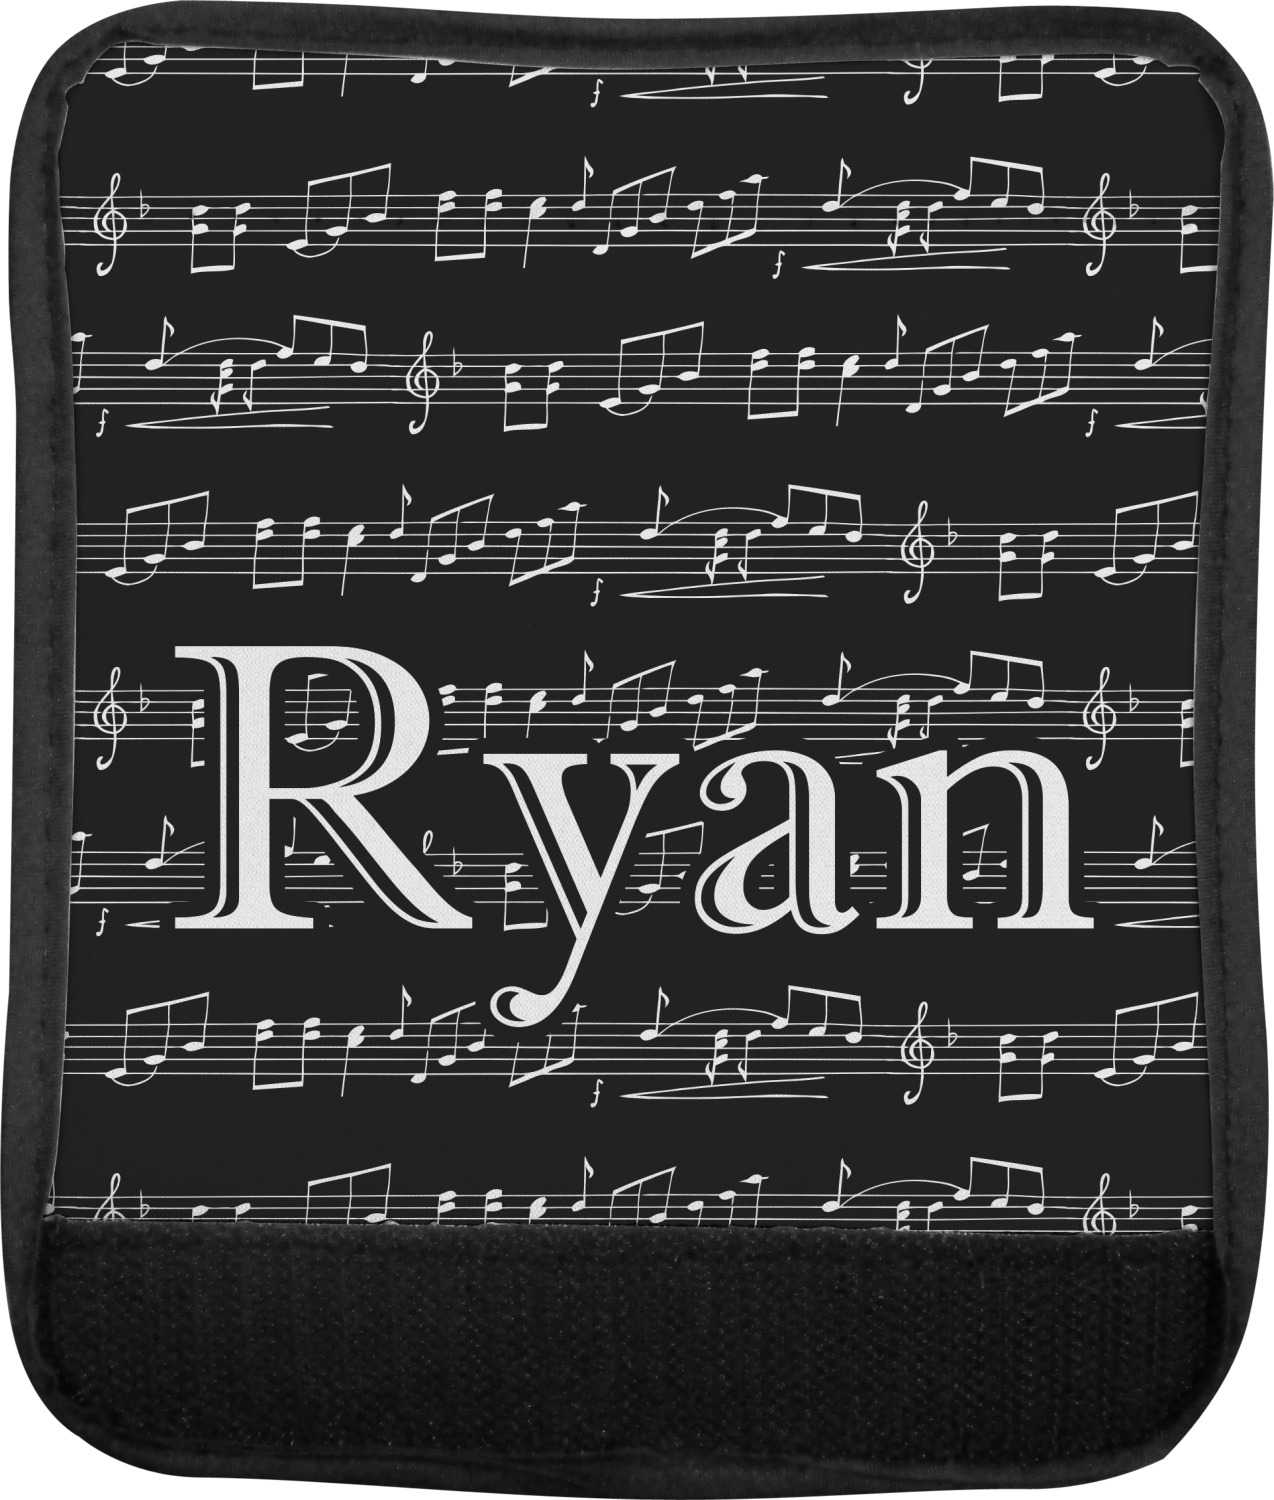 Personalized Luggage Handle Wrap at The Music Stand